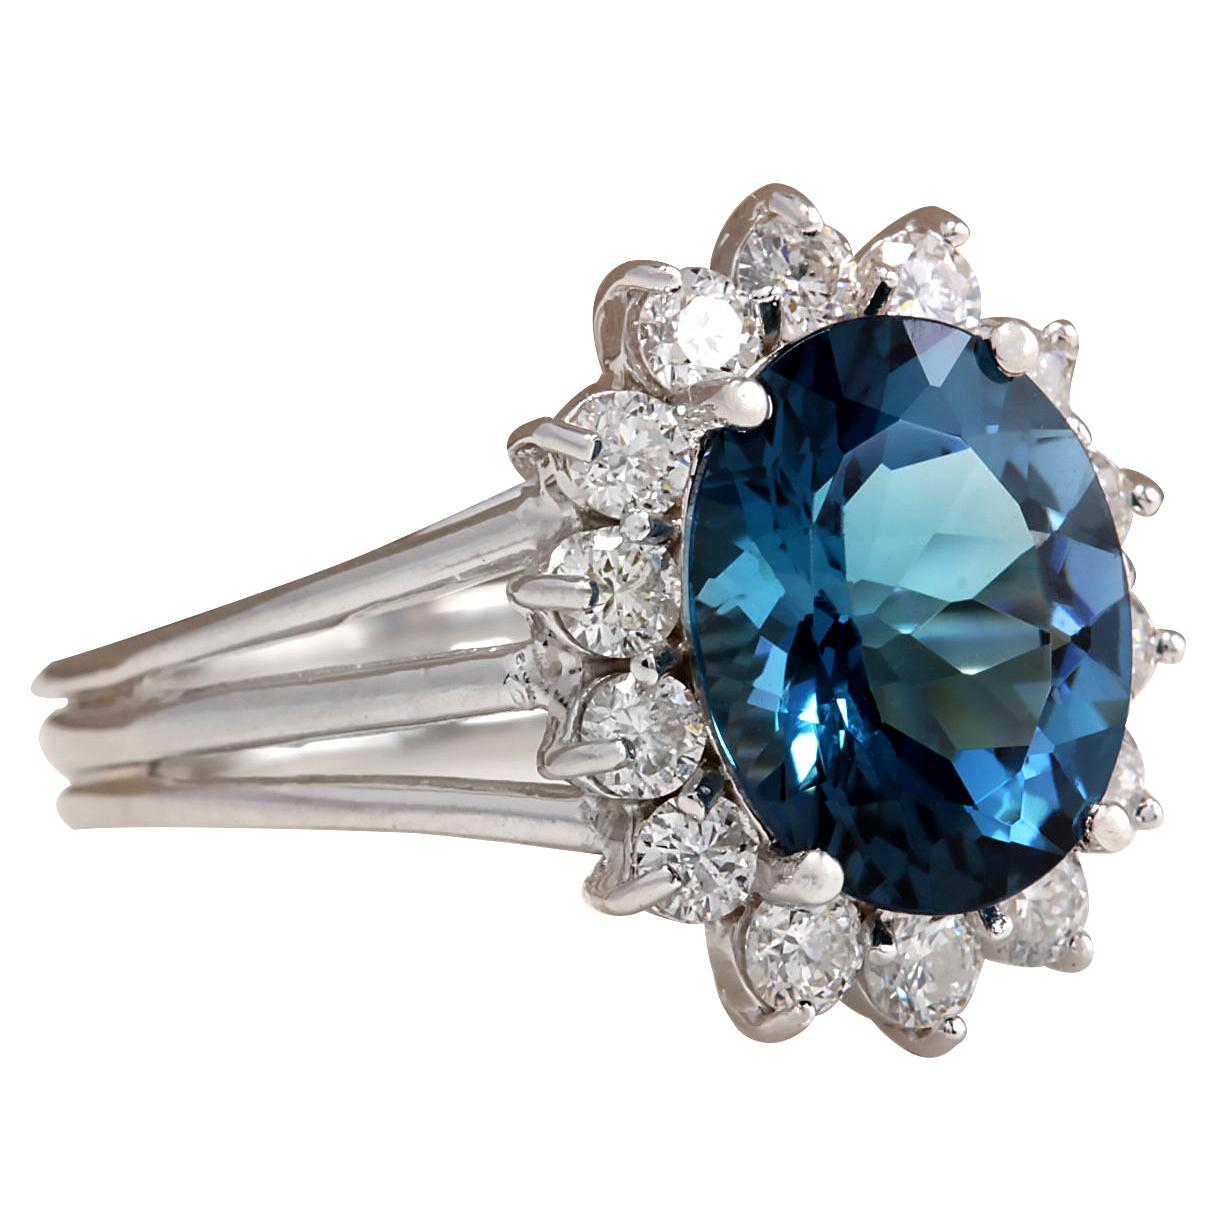 Stamped: 14K White Gold
Total Ring Weight: 4.1 Grams
Total Natural Topaz Weight is 3.67 Carat (Measures: 11.00x9.00 mm)
Color: London Blue
Total Natural Diamond Weight is 0.70 Carat
Color: F-G, Clarity: VS2-SI1
Face Measures: 16.10x13.30 mm
Sku: